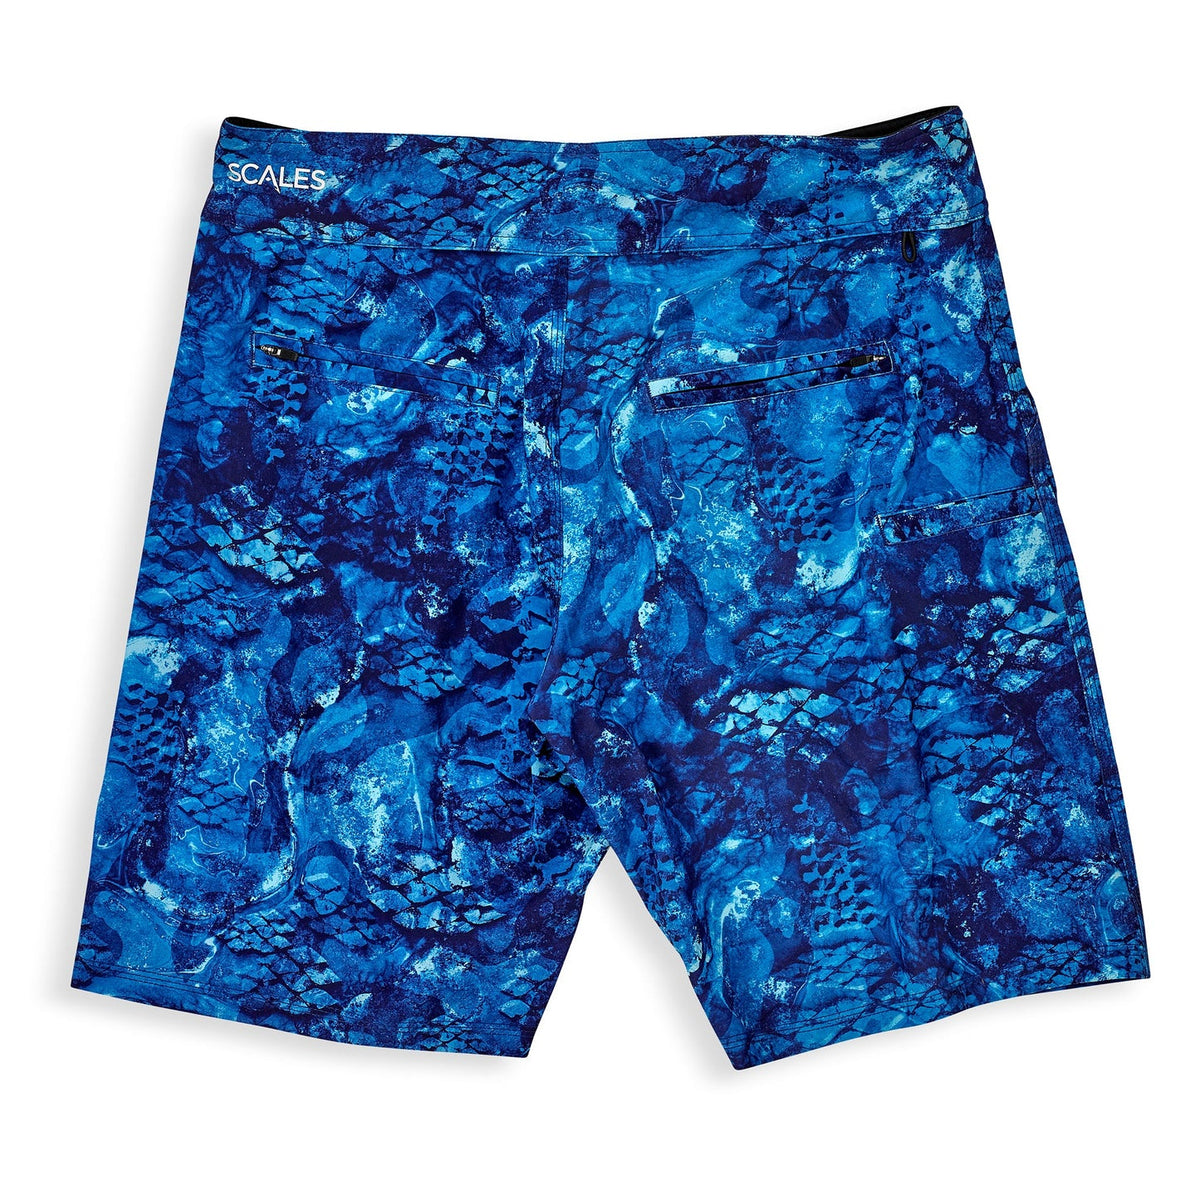 SCALES Camo First Mates Boardshorts